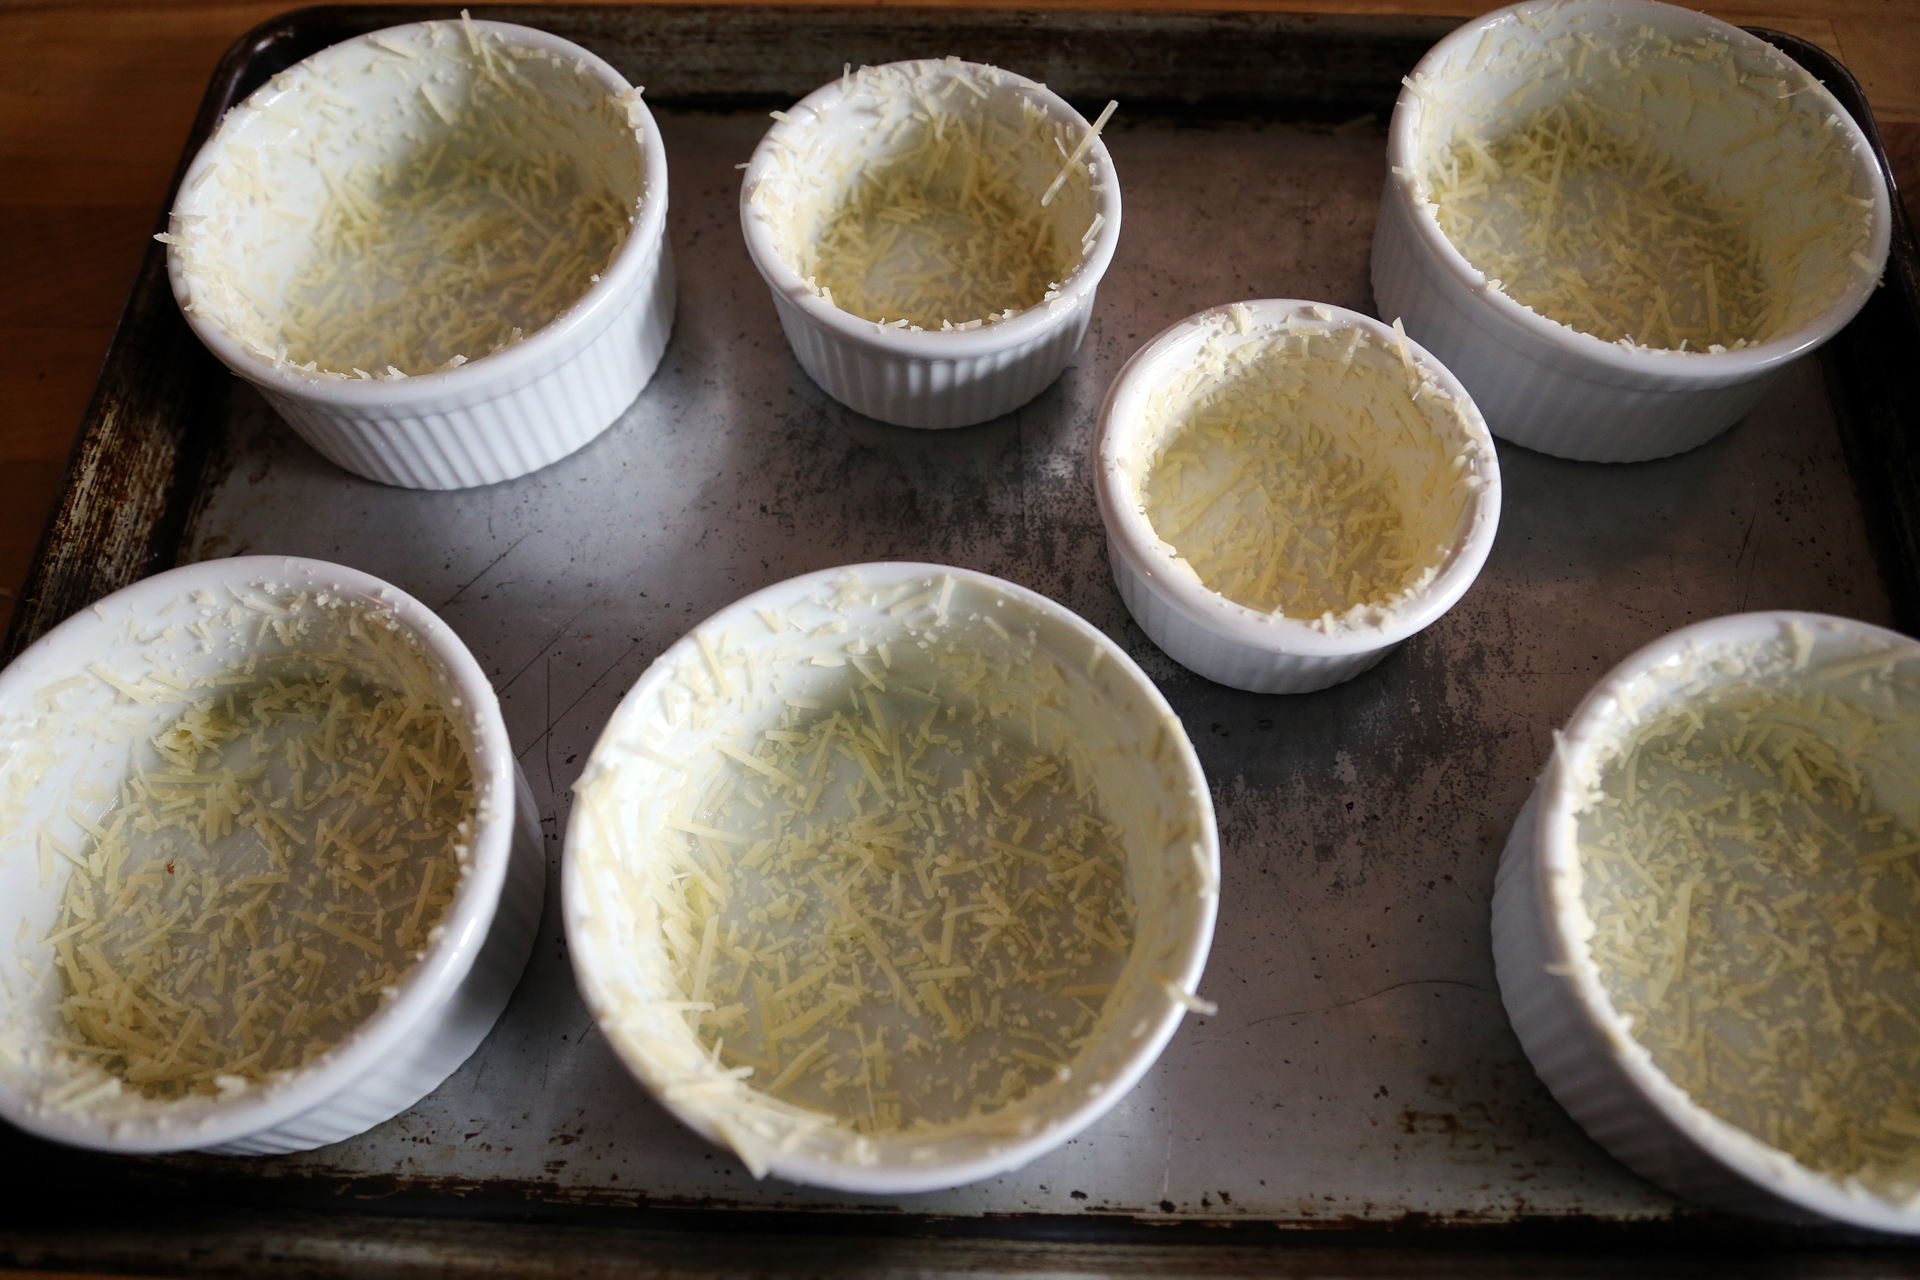 Generously butter the inside of six 1-cup ramekins, then coat lightly with Parmesan.